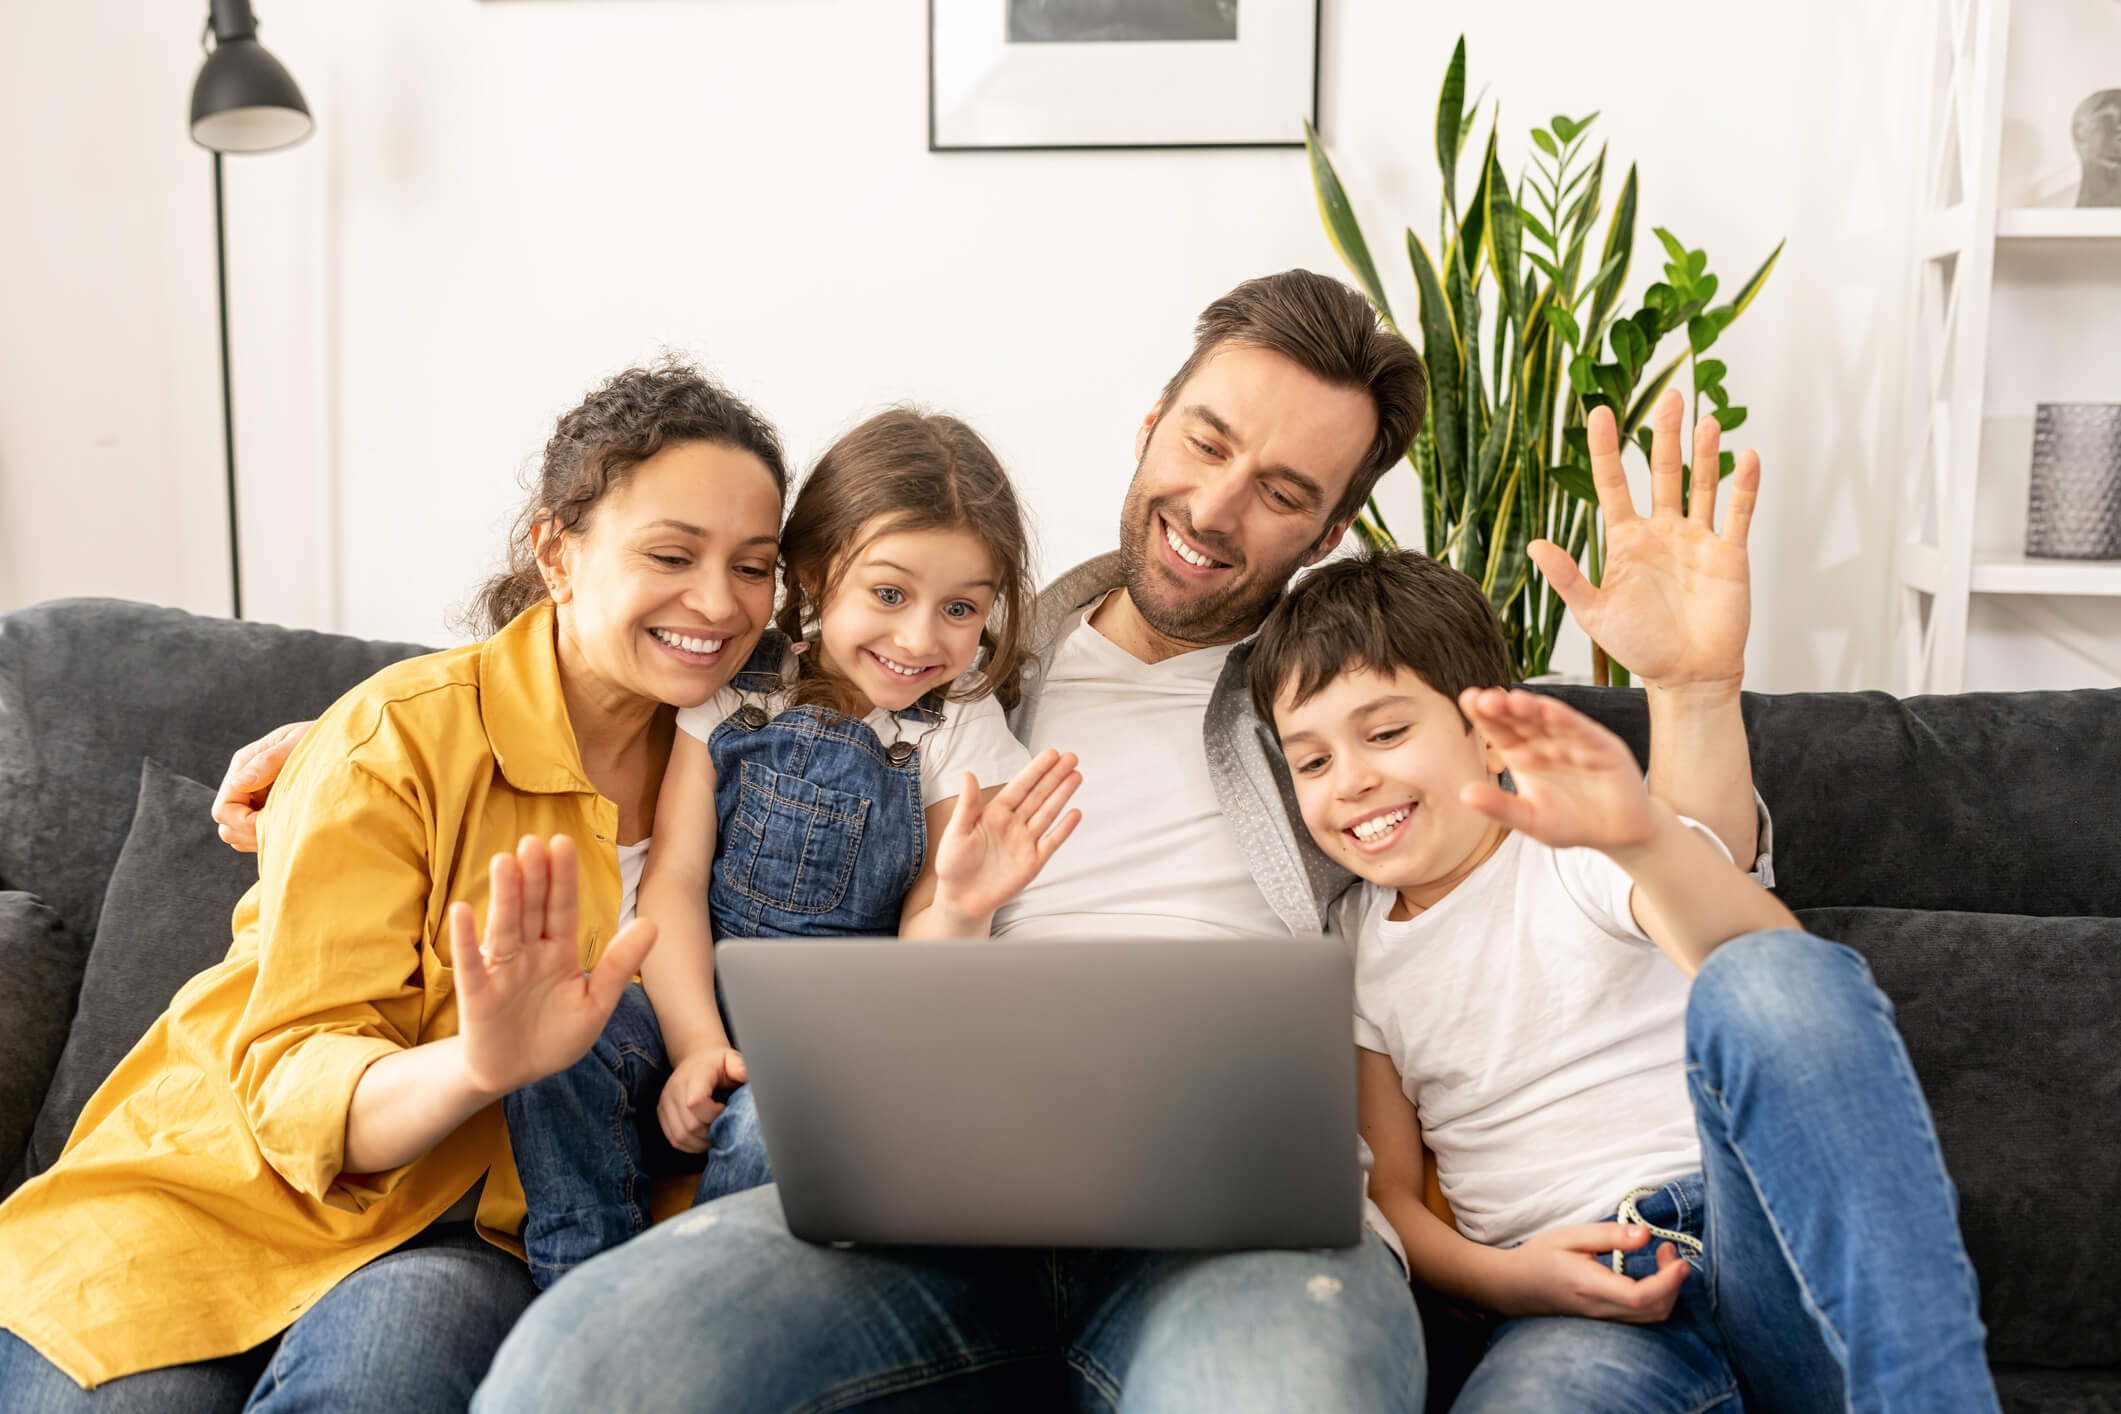 A family of four are sitting together on a couch and looking at a laptop screen; they are waving and smiling.